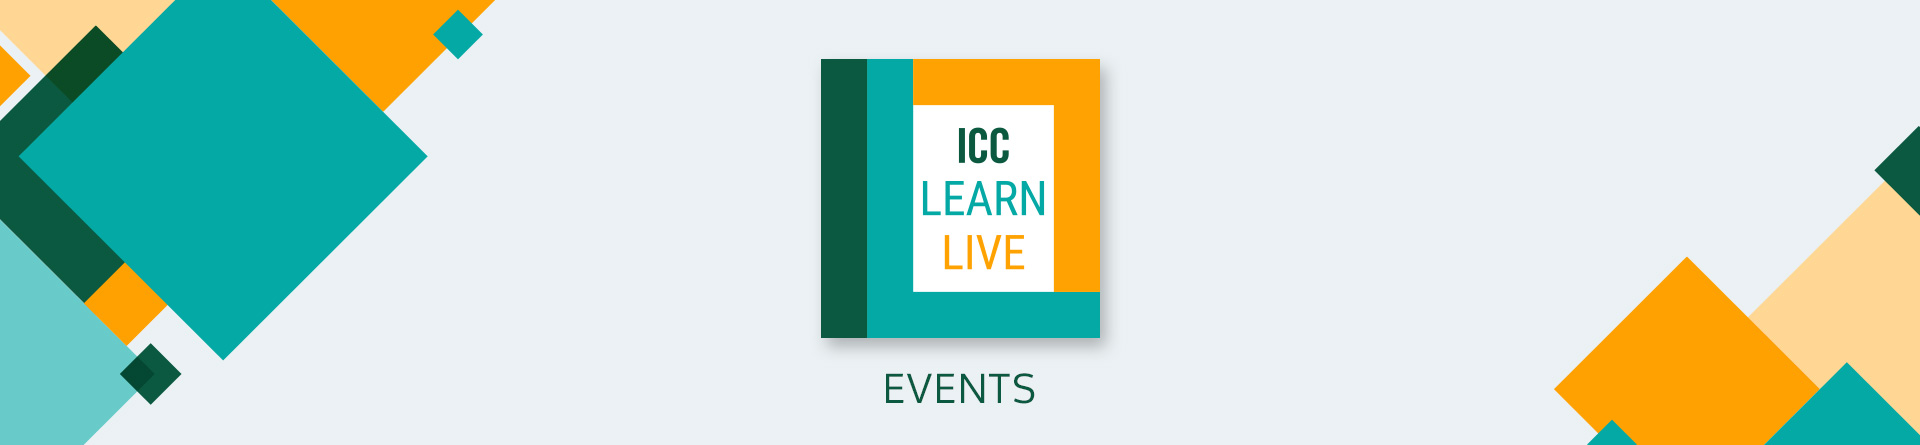 ICC Learn Live Events